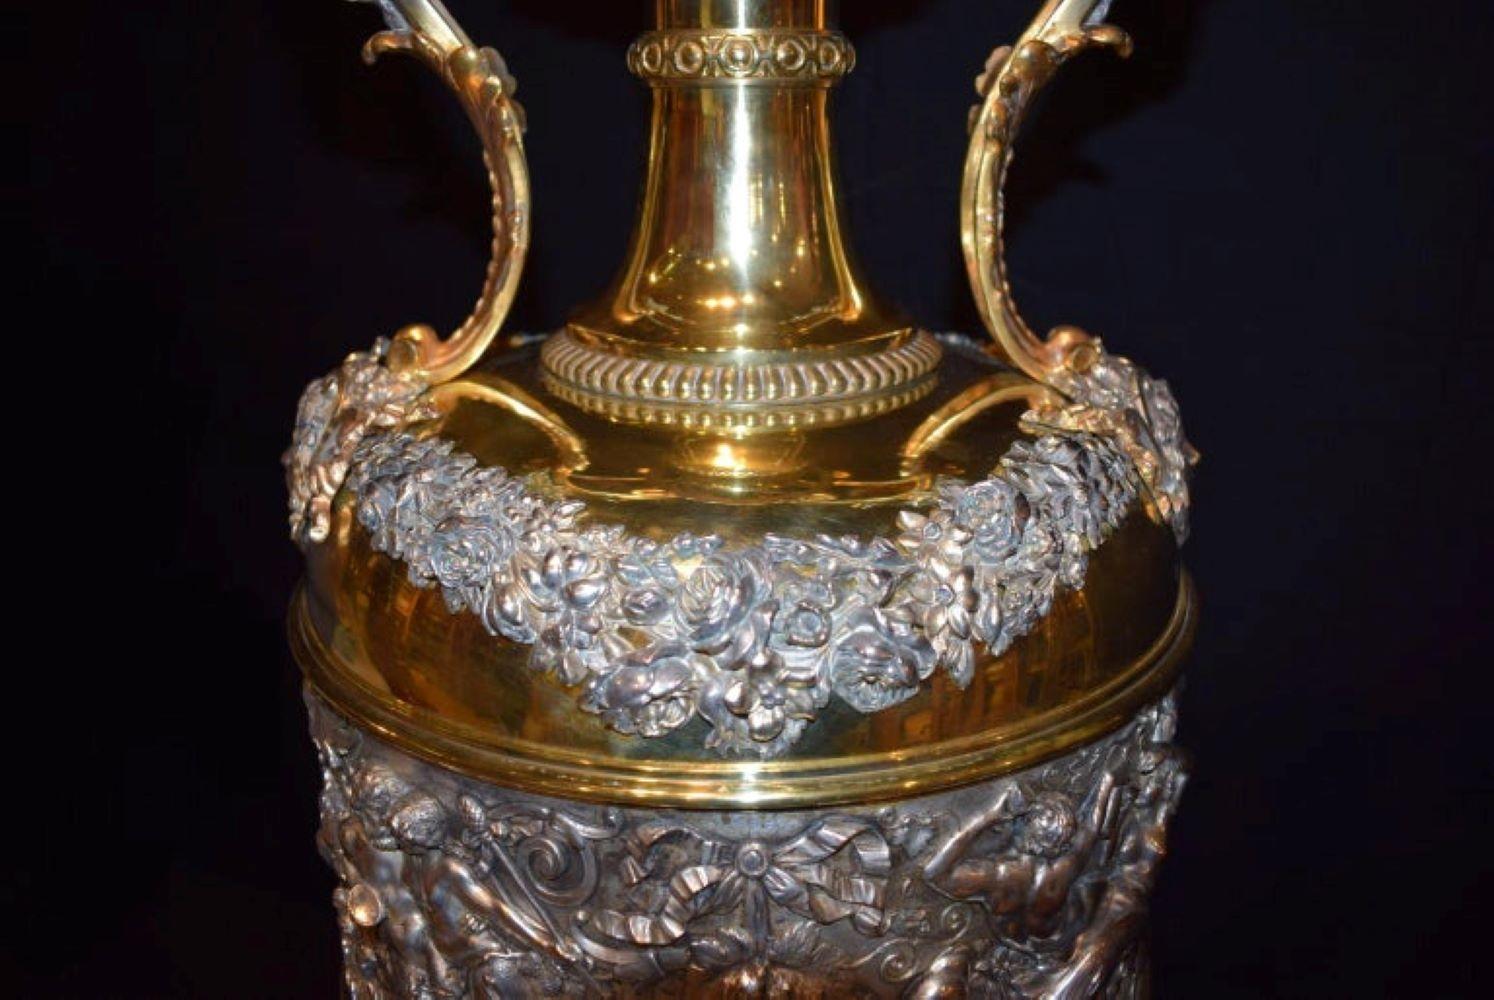 An Extraordinary large Belle Époque Urn in silver plate & gold plated with handles. An important Frieze Depicting Mythological figures ornate flower swags ending in female masks. At the bottom oval reserves and Lion's pelts over scroll. Dimensions: